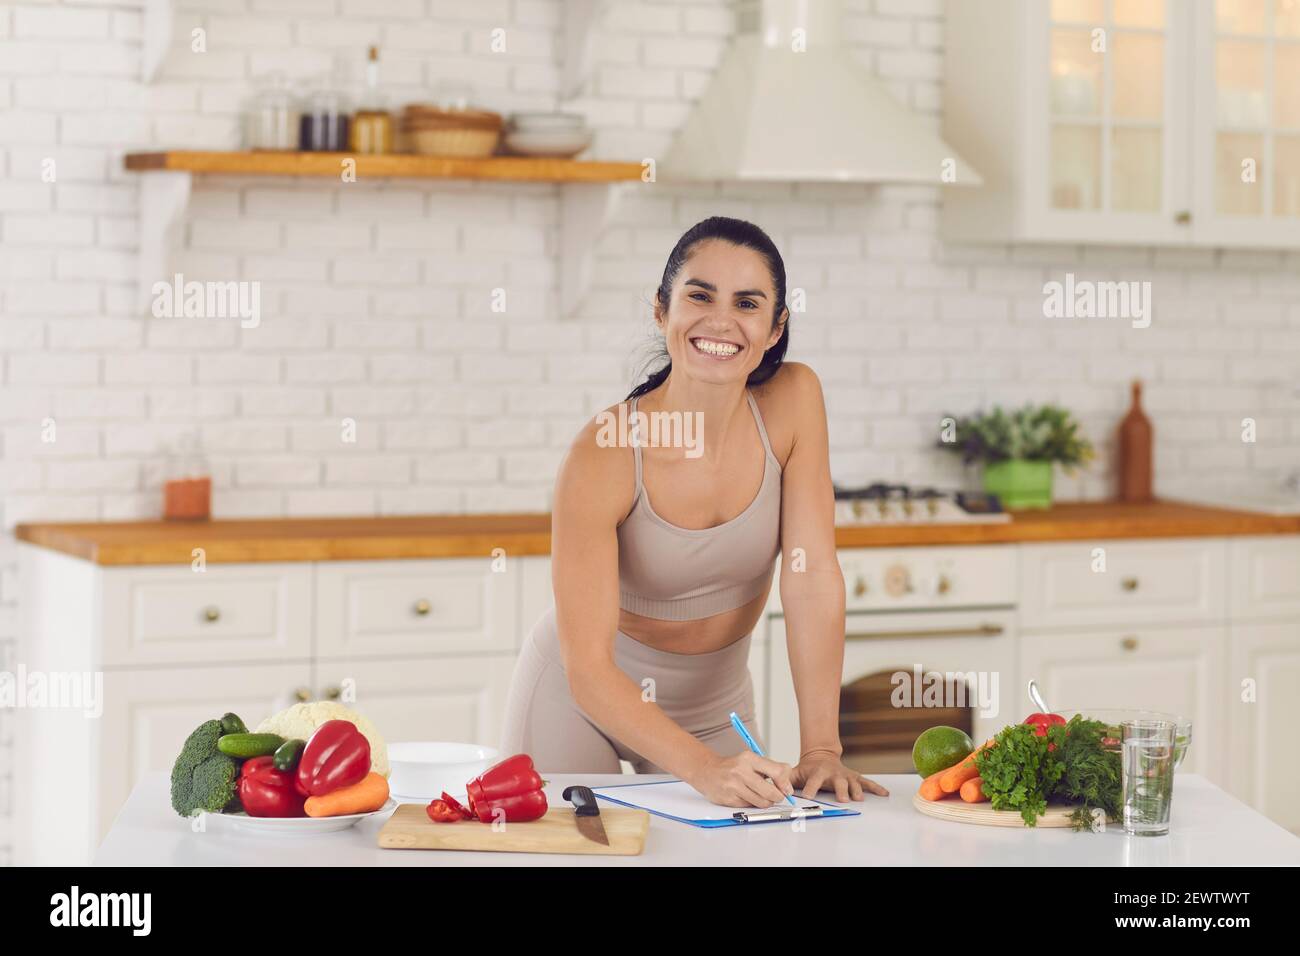 Smiling fitness woman in sportswear standing in kitchen and writing down healthy recipe Stock Photo